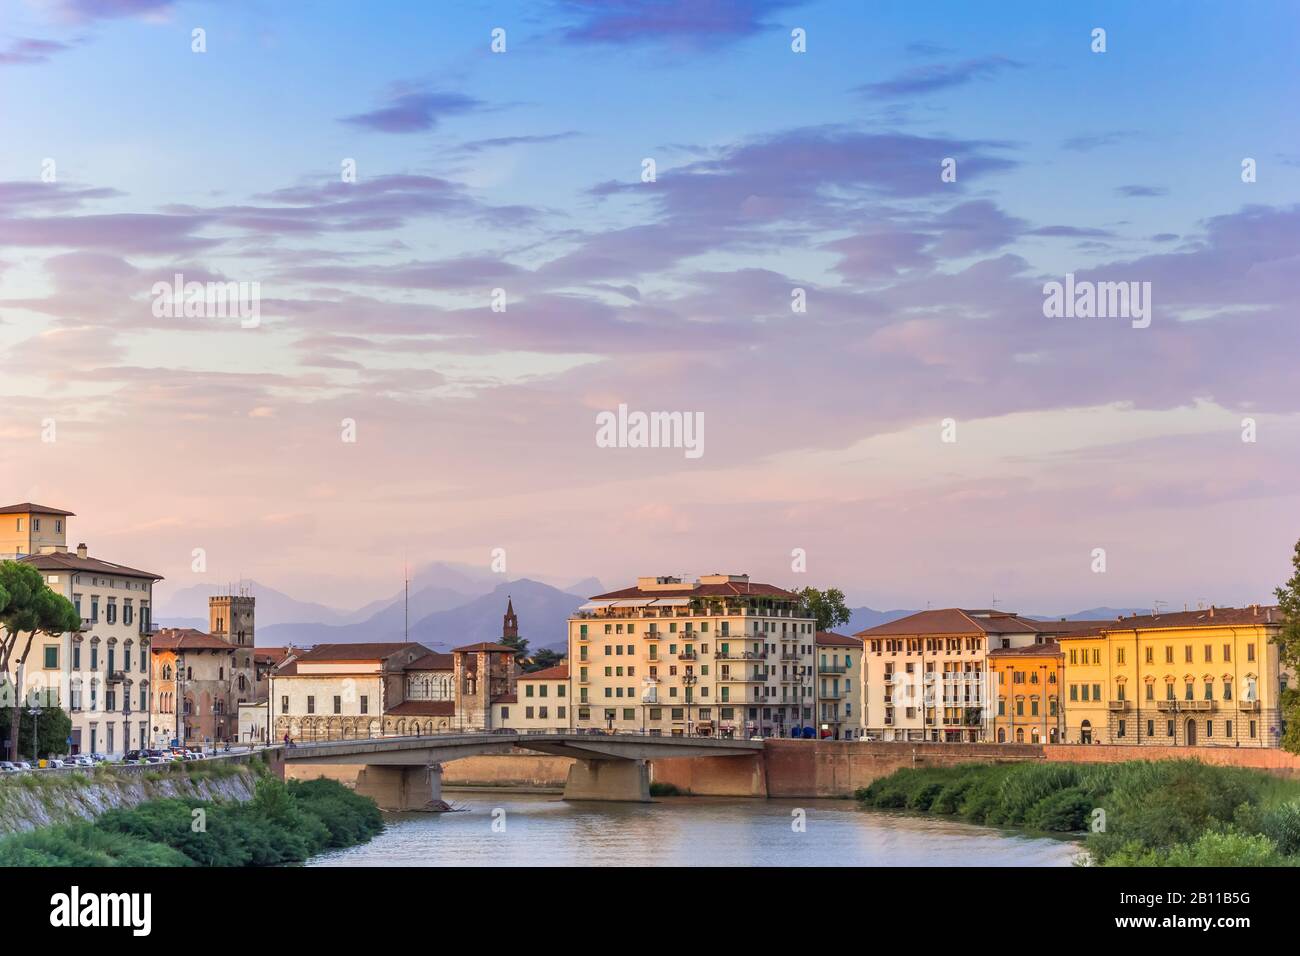 River Arno and colorful buildings in the evening light in Pisa, Tuscany, Italy Stock Photo